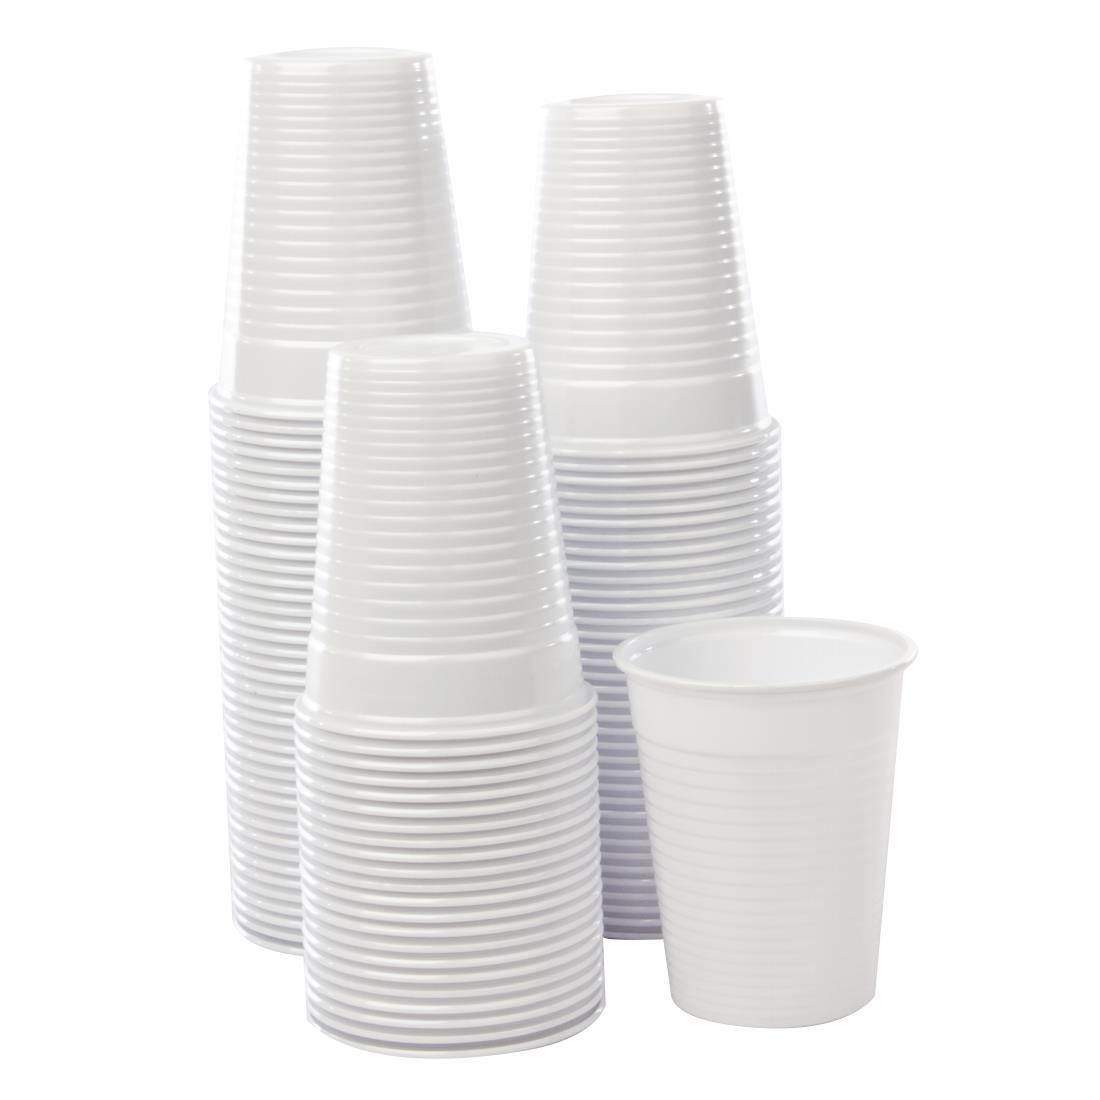 Water Cooler Cups White 200ml / 7oz (Pack of 2000) - GF917  - 2